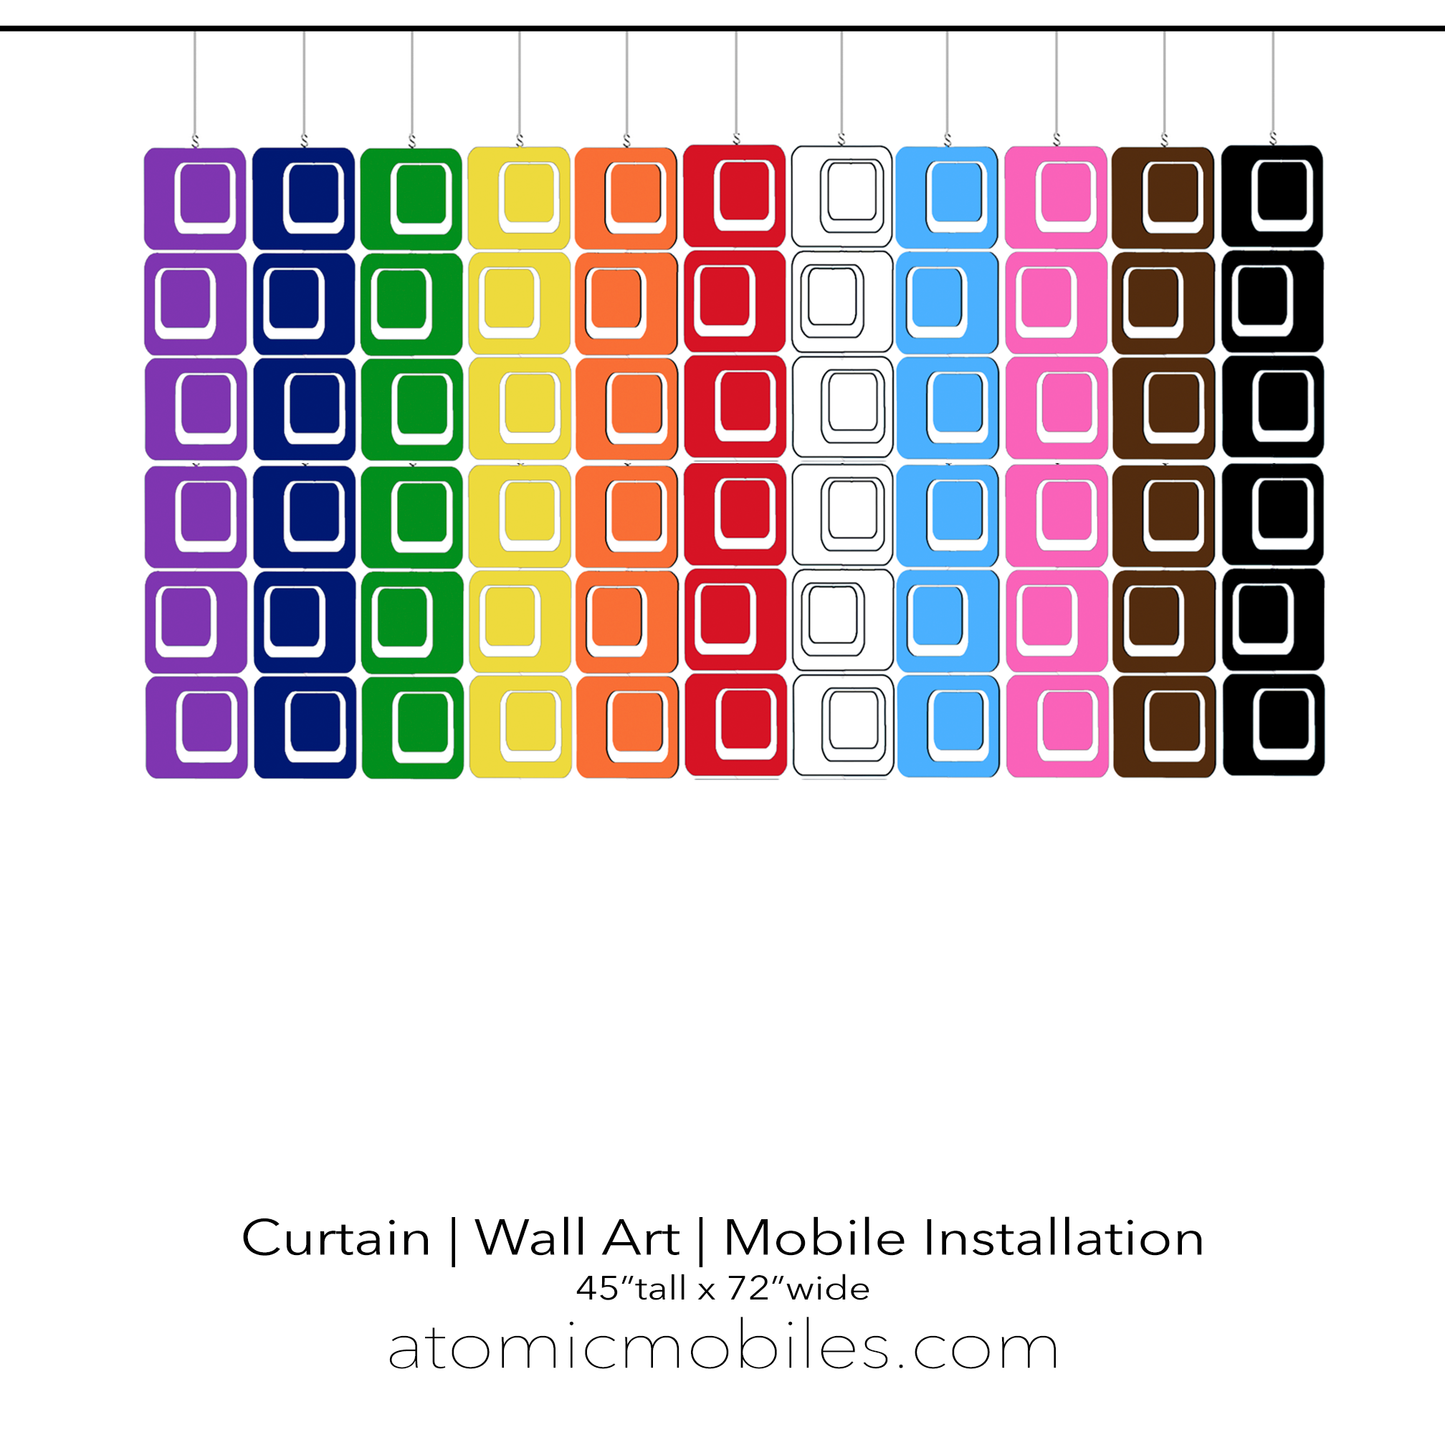 LGBTQ+ Unity Curtain, Wall Art, Mobile Installation, Room Divider 45"x72" by AtomicMobiles.com - LOVE IS LOVE